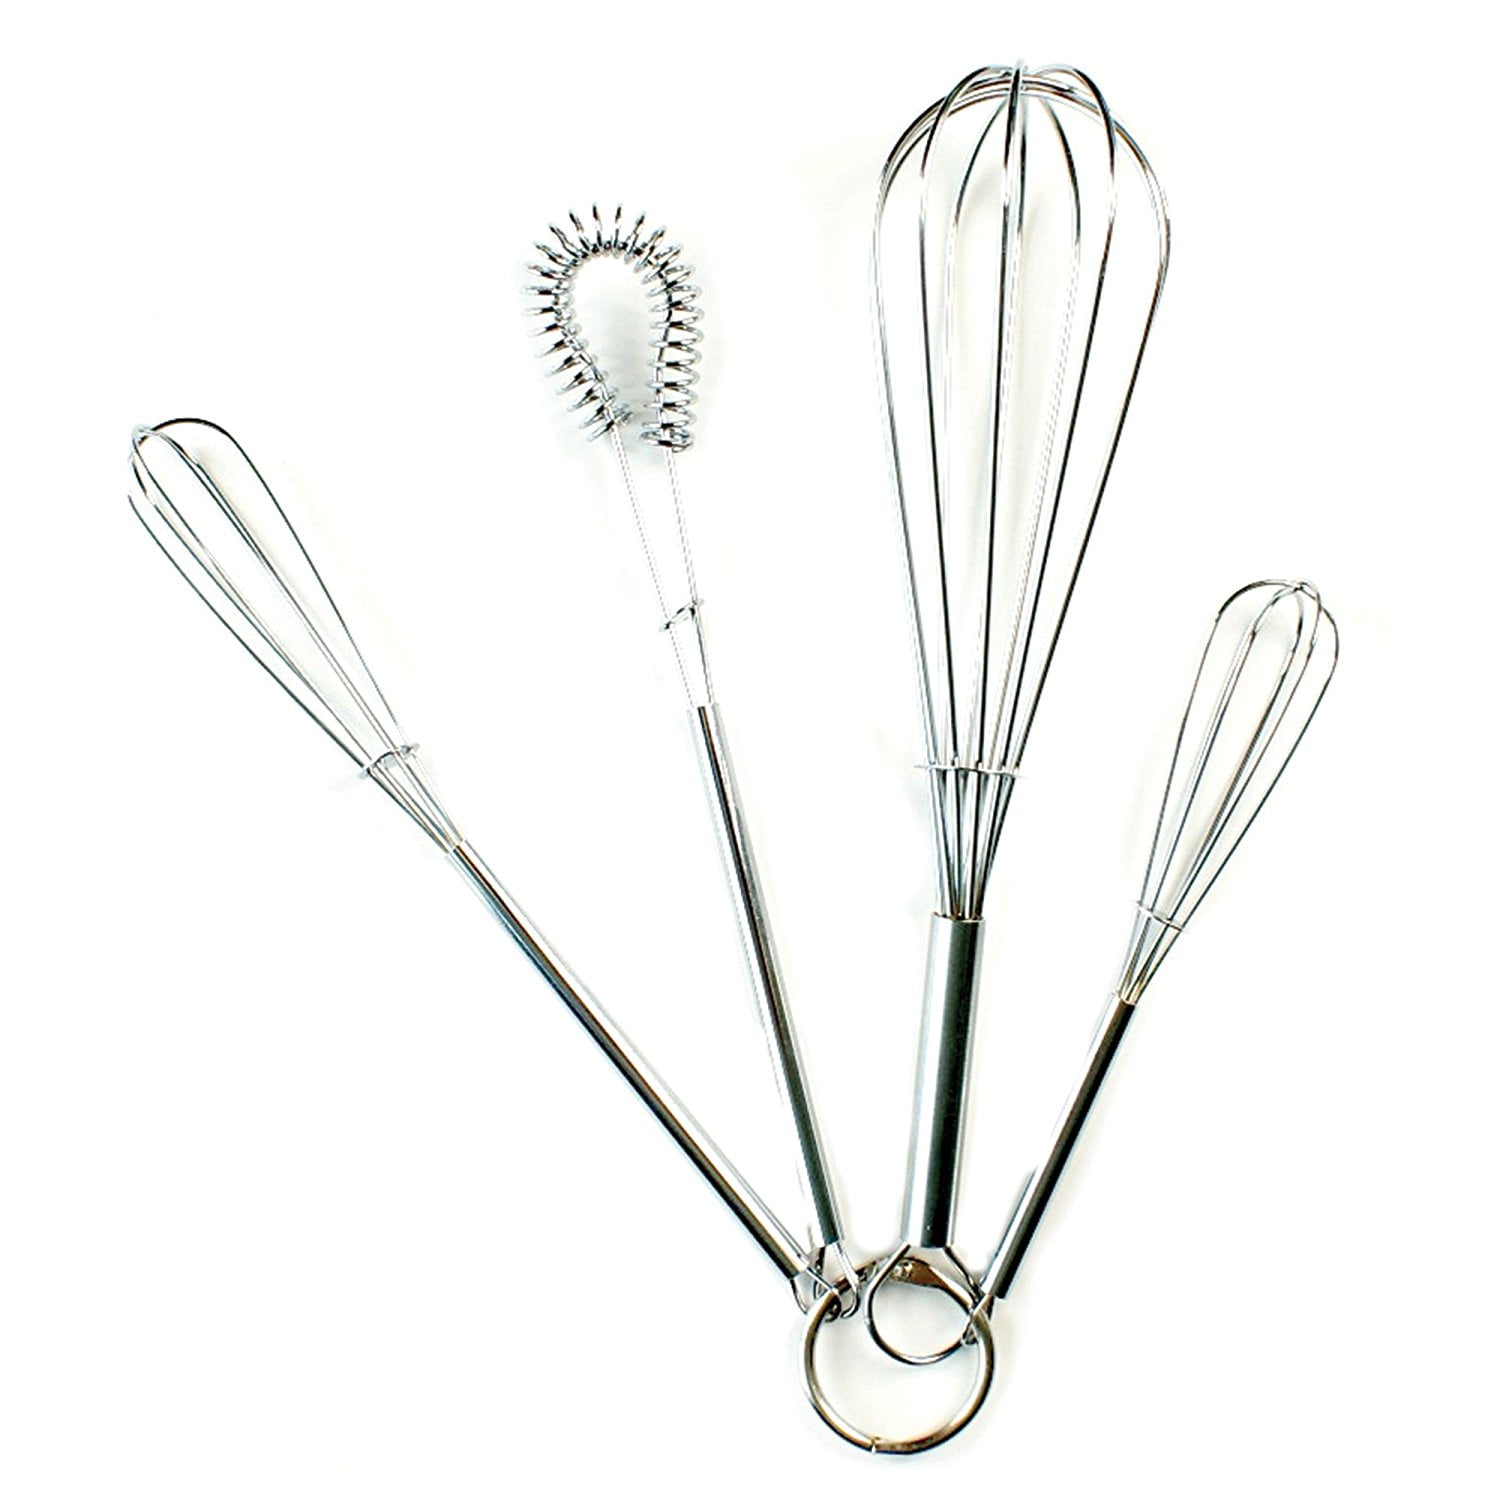 Walfos Mini Whisks Stainless Steel, Small Whisk 2 Pieces, 5in and 7in Tiny  Whisk for Whisking, Beating, Blending Ingredients, Mixing Sauces